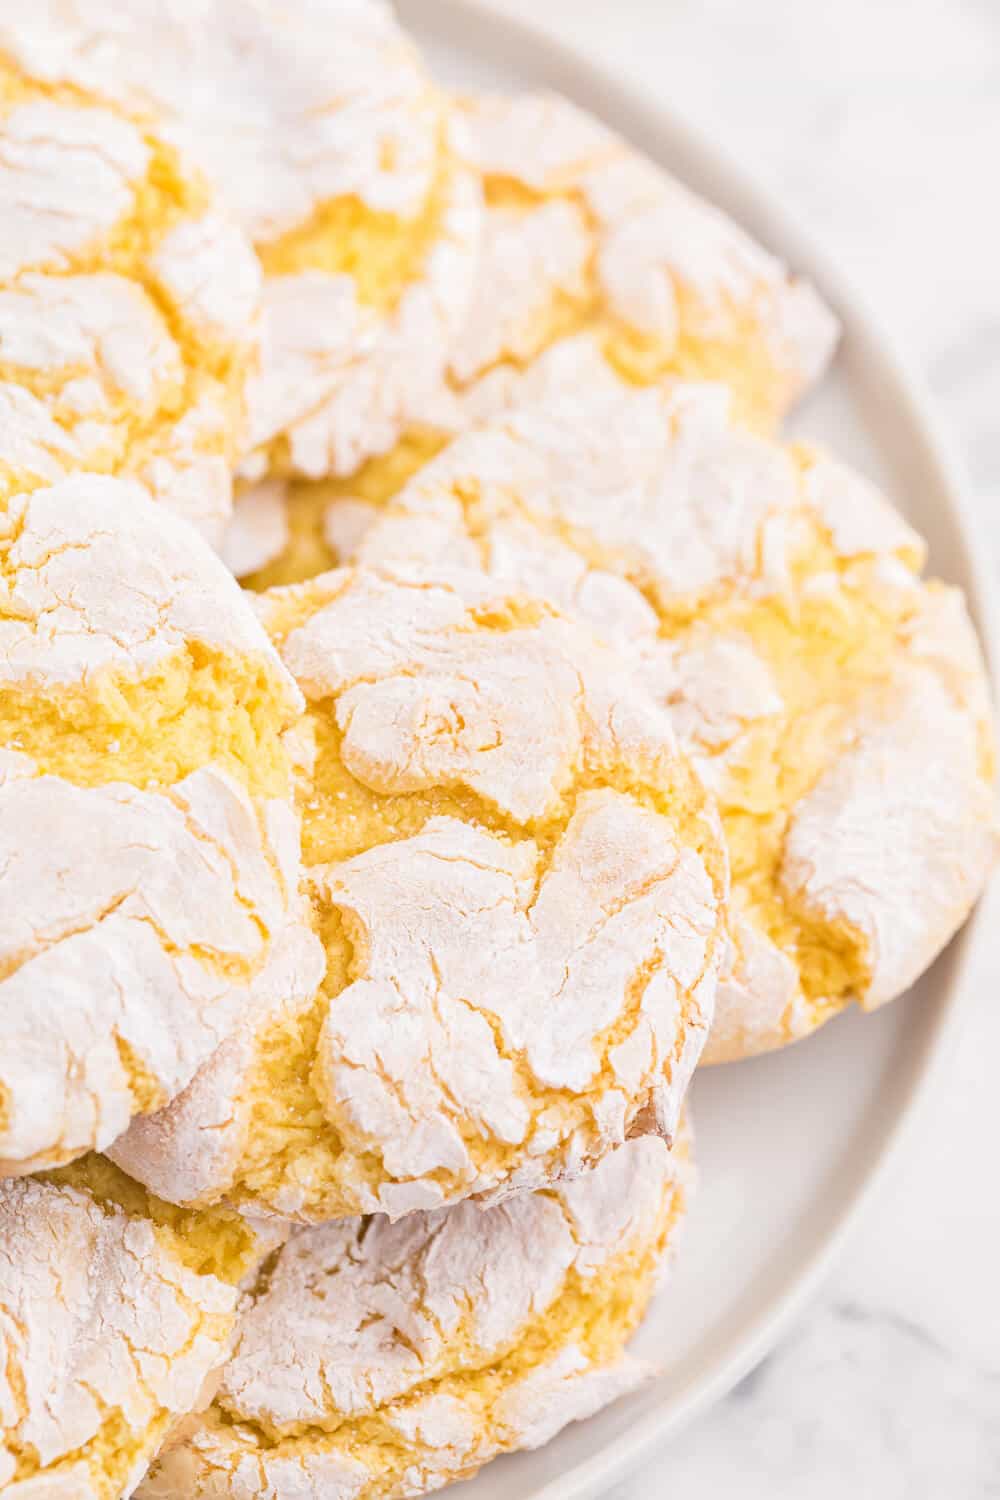 Cool Whip Cookies Recipe - One of the easiest cookie recipes you'll ever make. Grab a box of your favorite cake mix, Cool Whip, an egg and powdered sugar and get started! Create a variety of flavors like lemon, strawberry, red velvet, funfetti, chocolate and more.